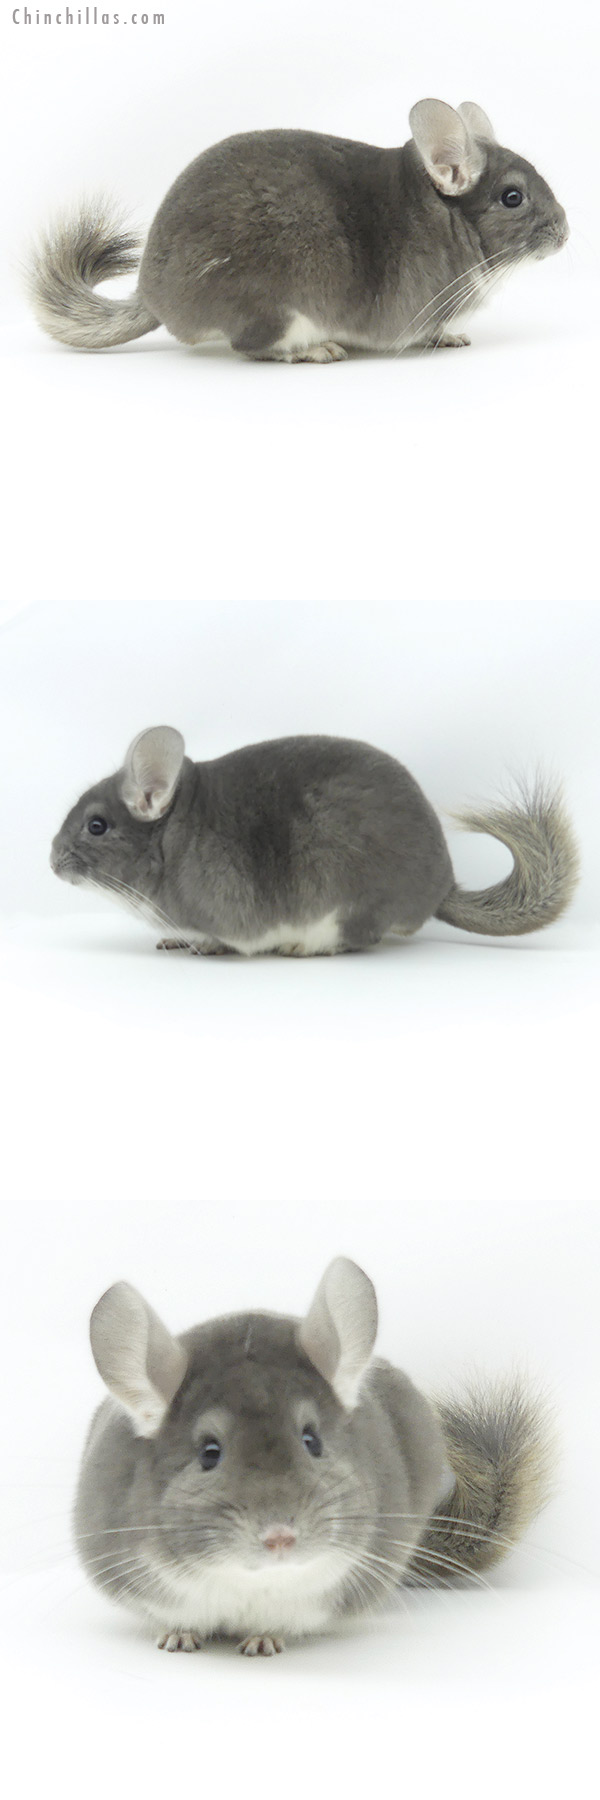 Chinchilla or related item offered for sale or export on Chinchillas.com - 19381 Top Show Quality Violet Male Chinchilla